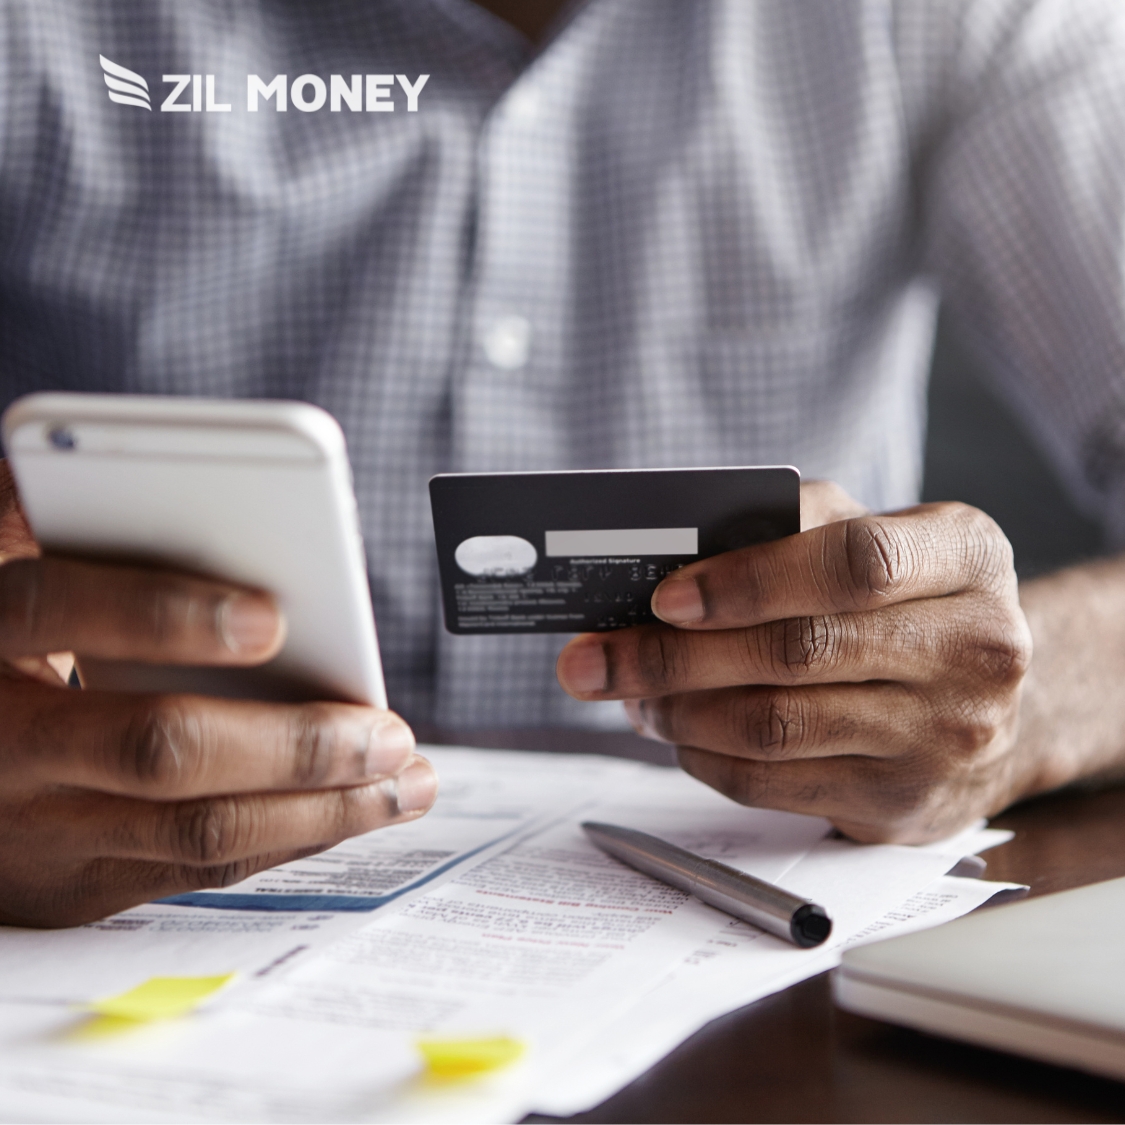 From Transactions to Rewards: Exploring the Value of Credit Card to Pay Bill. a Person Sitting at a Desk Holding a Smartphone in One Hand and a Credit Card in the Other.